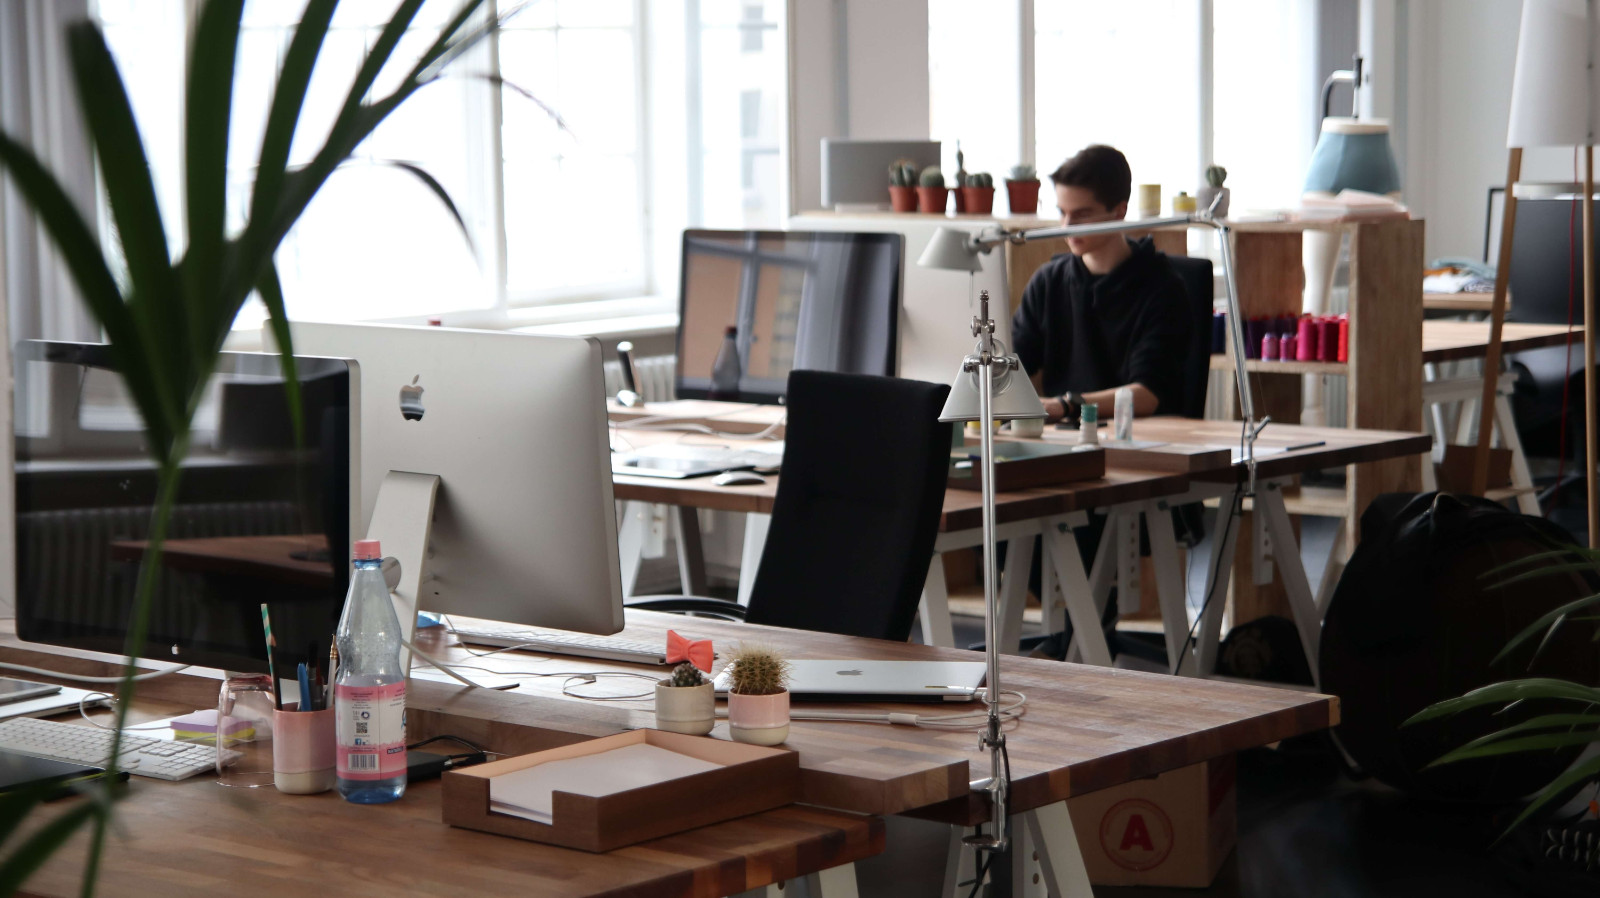 4 Ways to Improve Your Office’s Work Environment